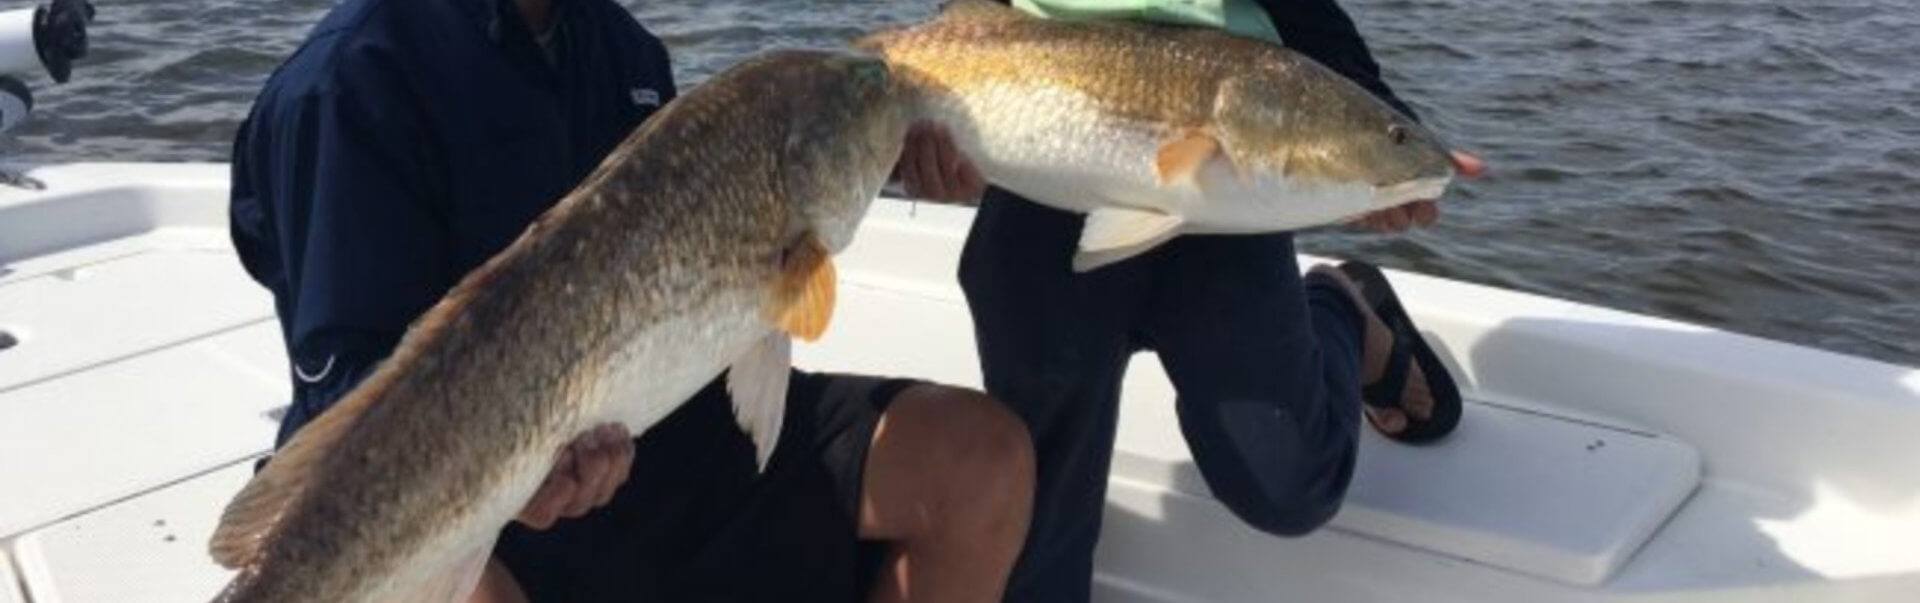 Speckled Trout caught on inshore fishing charter in Venice, LA